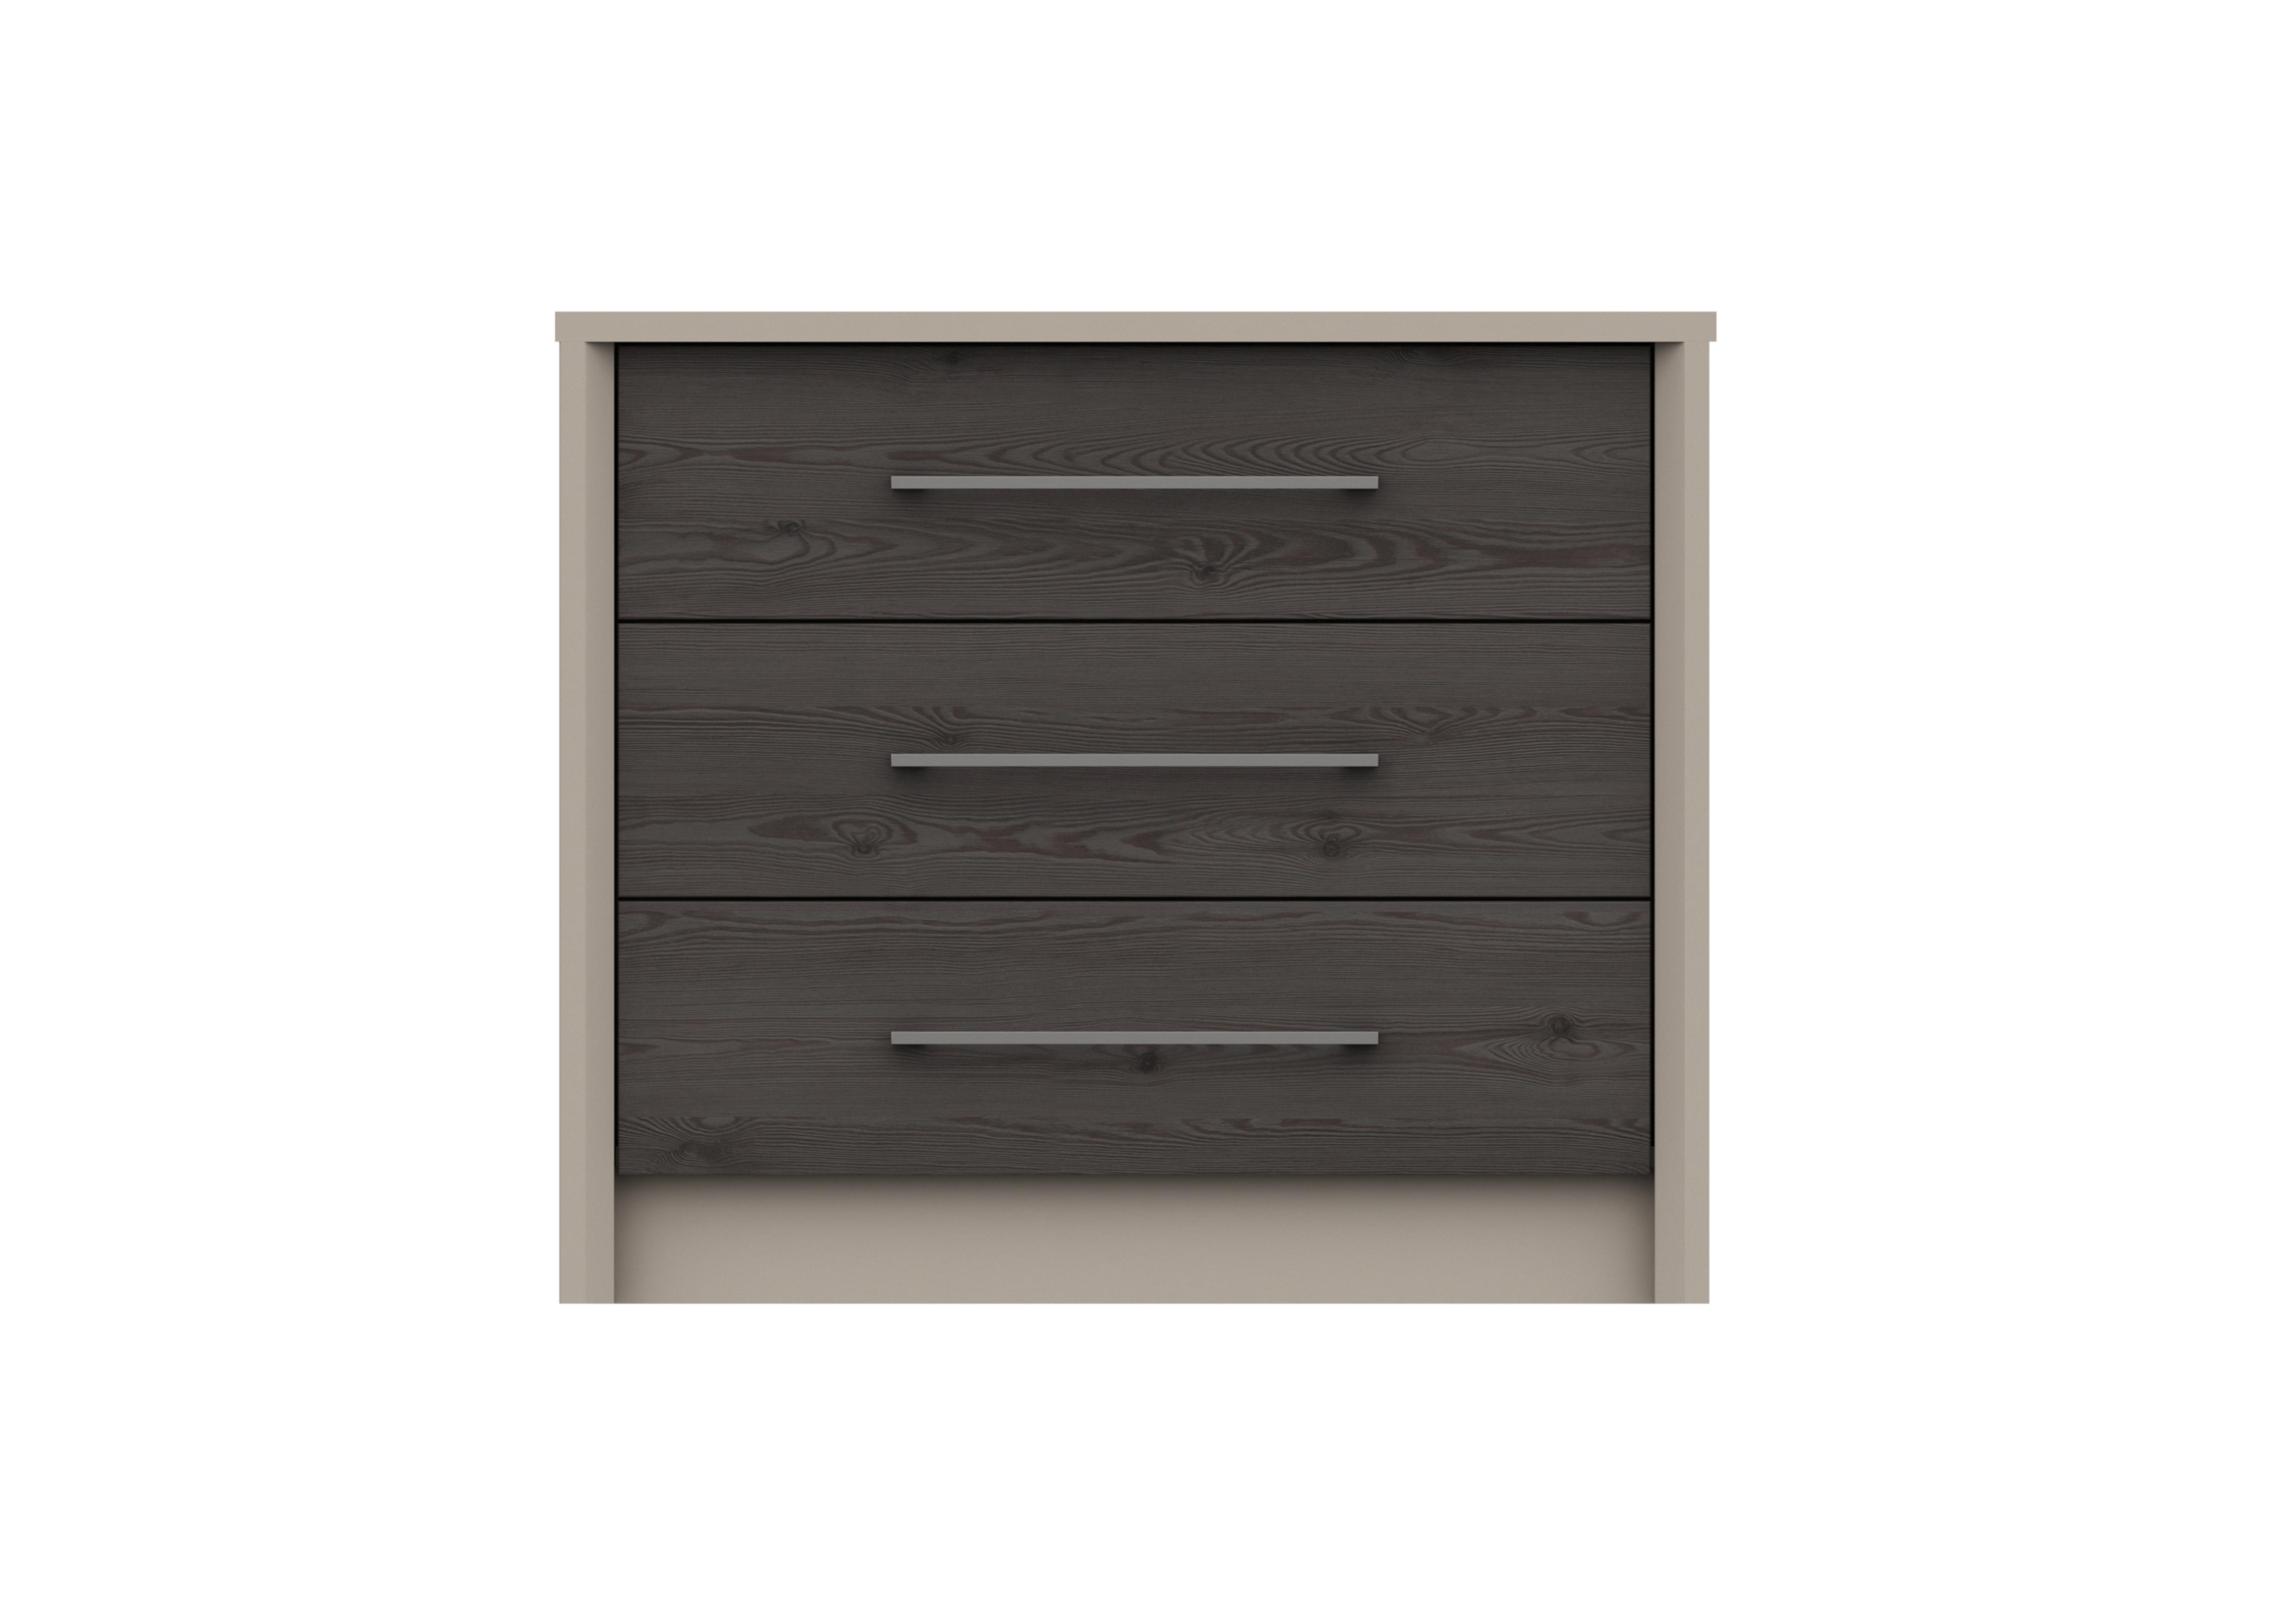 Paddington 3 Drawer Chest in Fired Earth/Anthracite Larch on Furniture Village